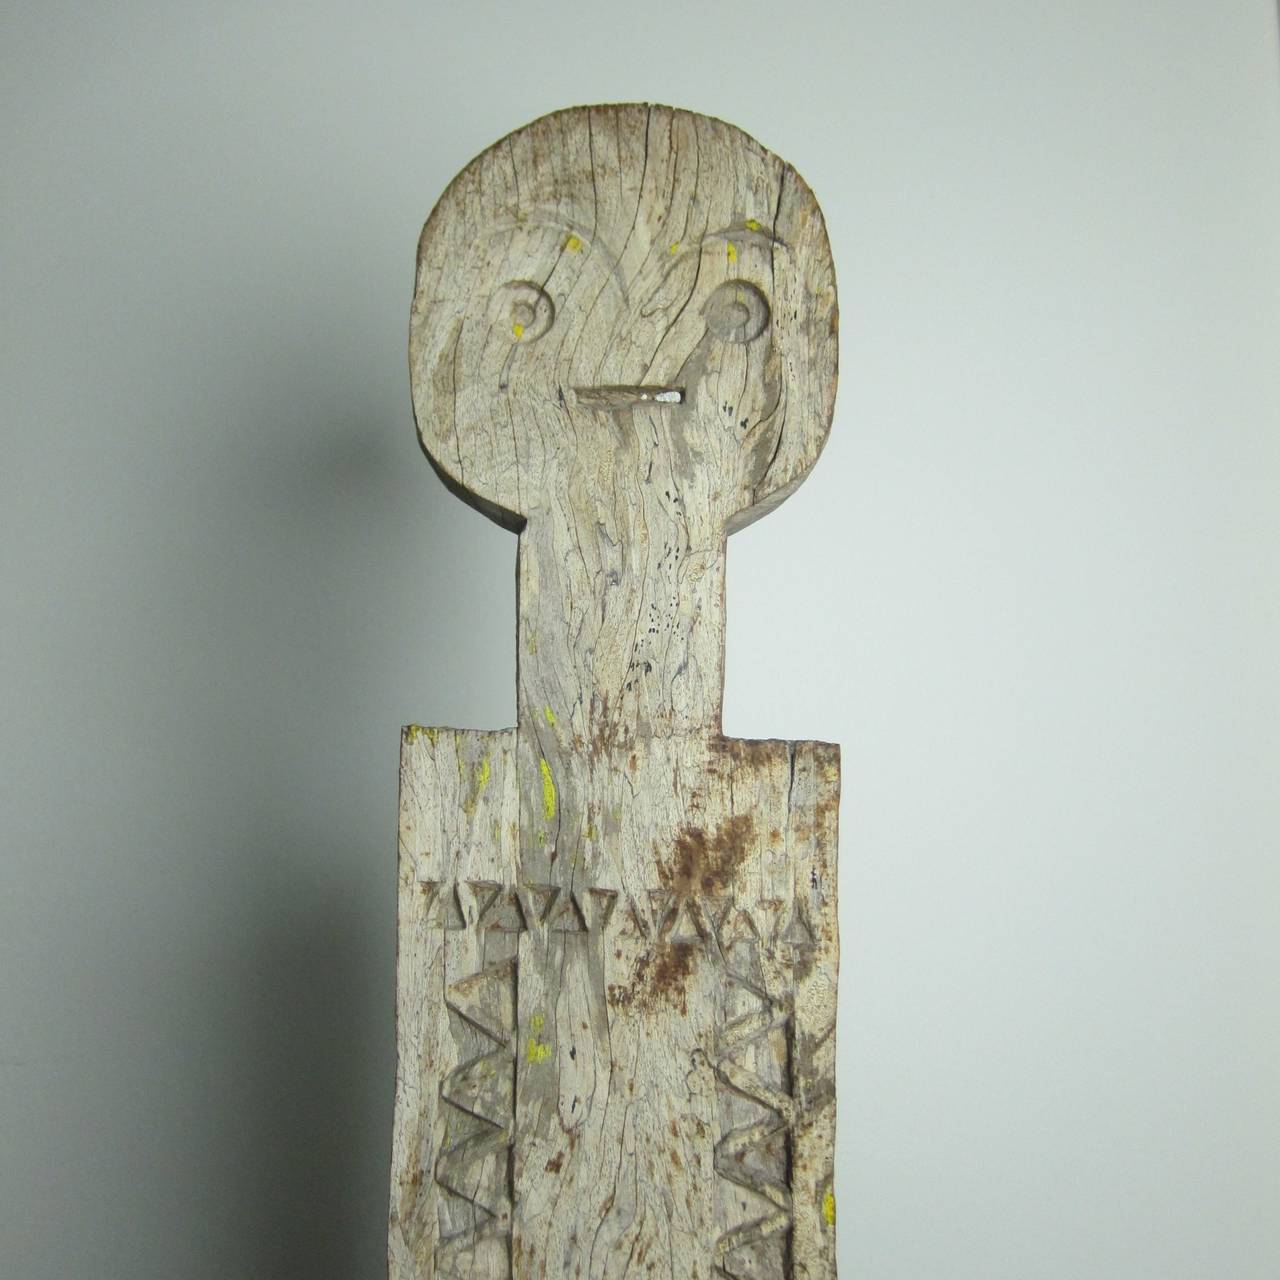 A highly abstract wooden post from Kenya.

The Giryama people of the Kenyan coast are known for their long standing tradition of carved wooden mortuary posts. The grave posts, called kikangu, serve a number of functions within Giryama life. In the